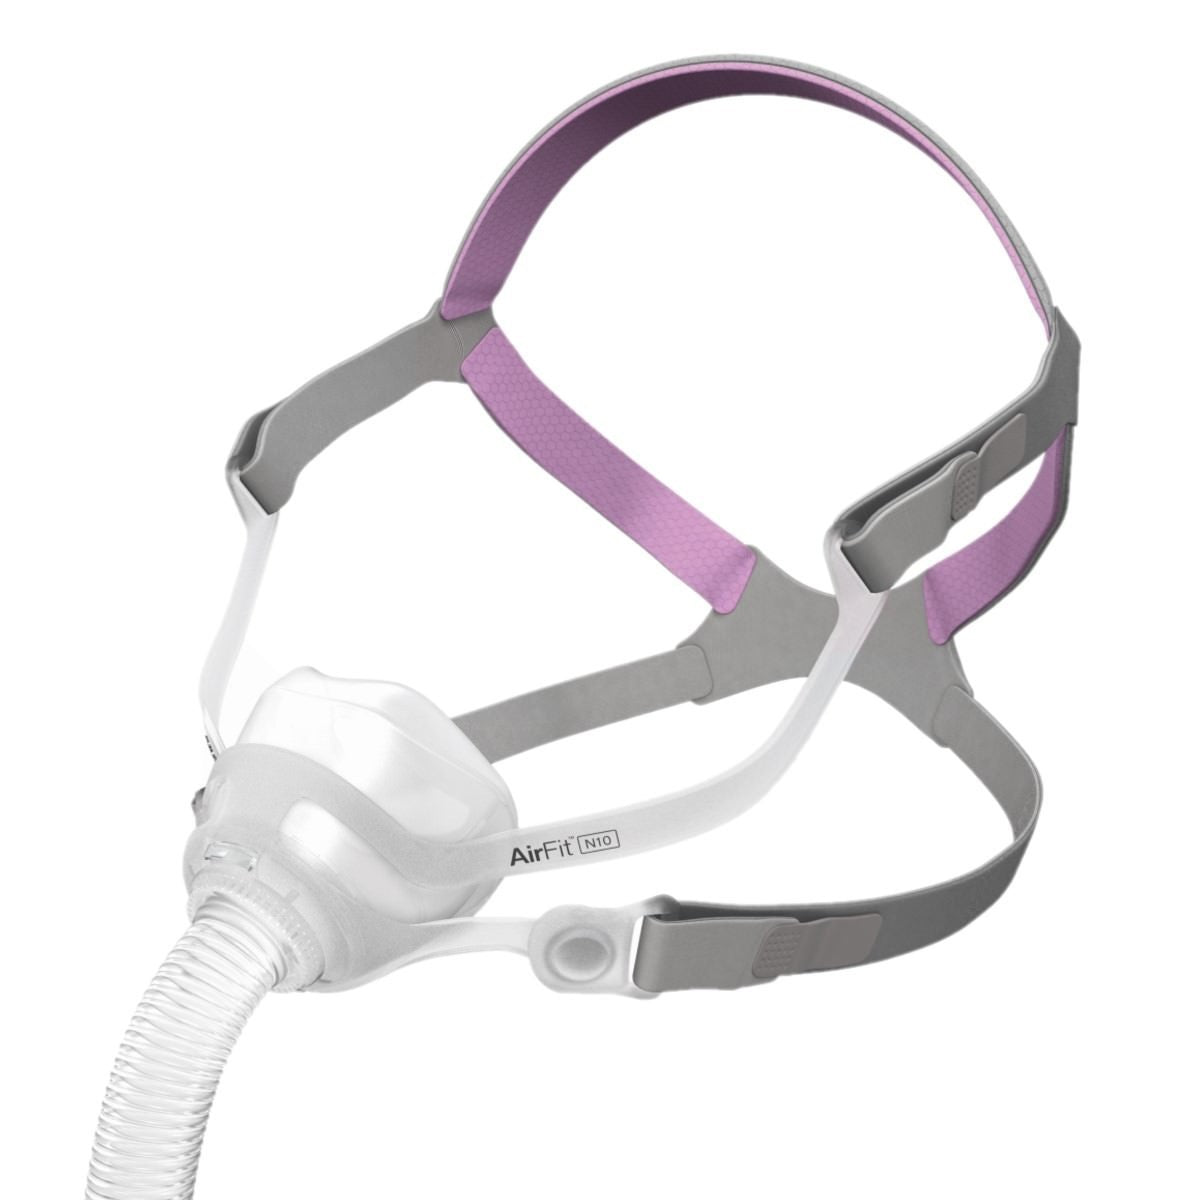 Resmed AirFit N10 For Her Nasal Mask System with Headgear